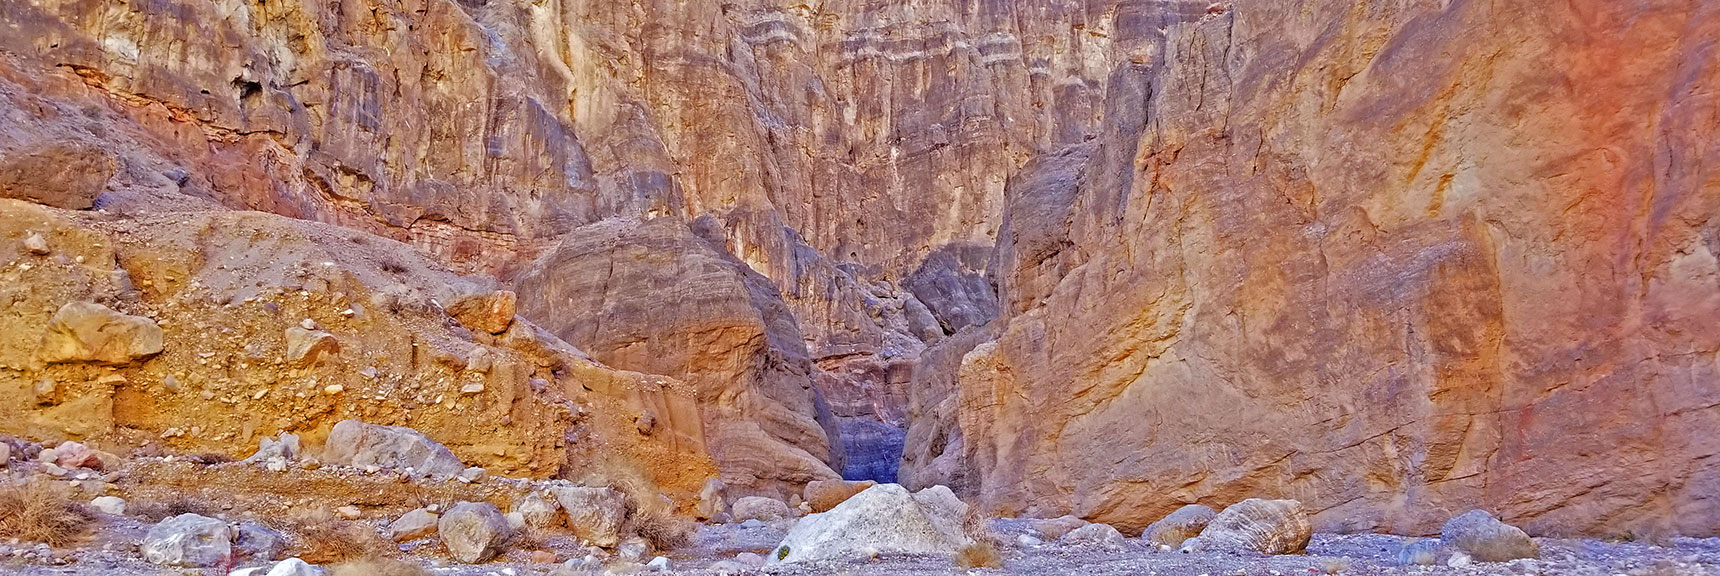 Just One Canyon North of Titus Canyon, Fall Canyon Has its Own Unique Beauty | Fall Canyon | Death Valley National Park, California